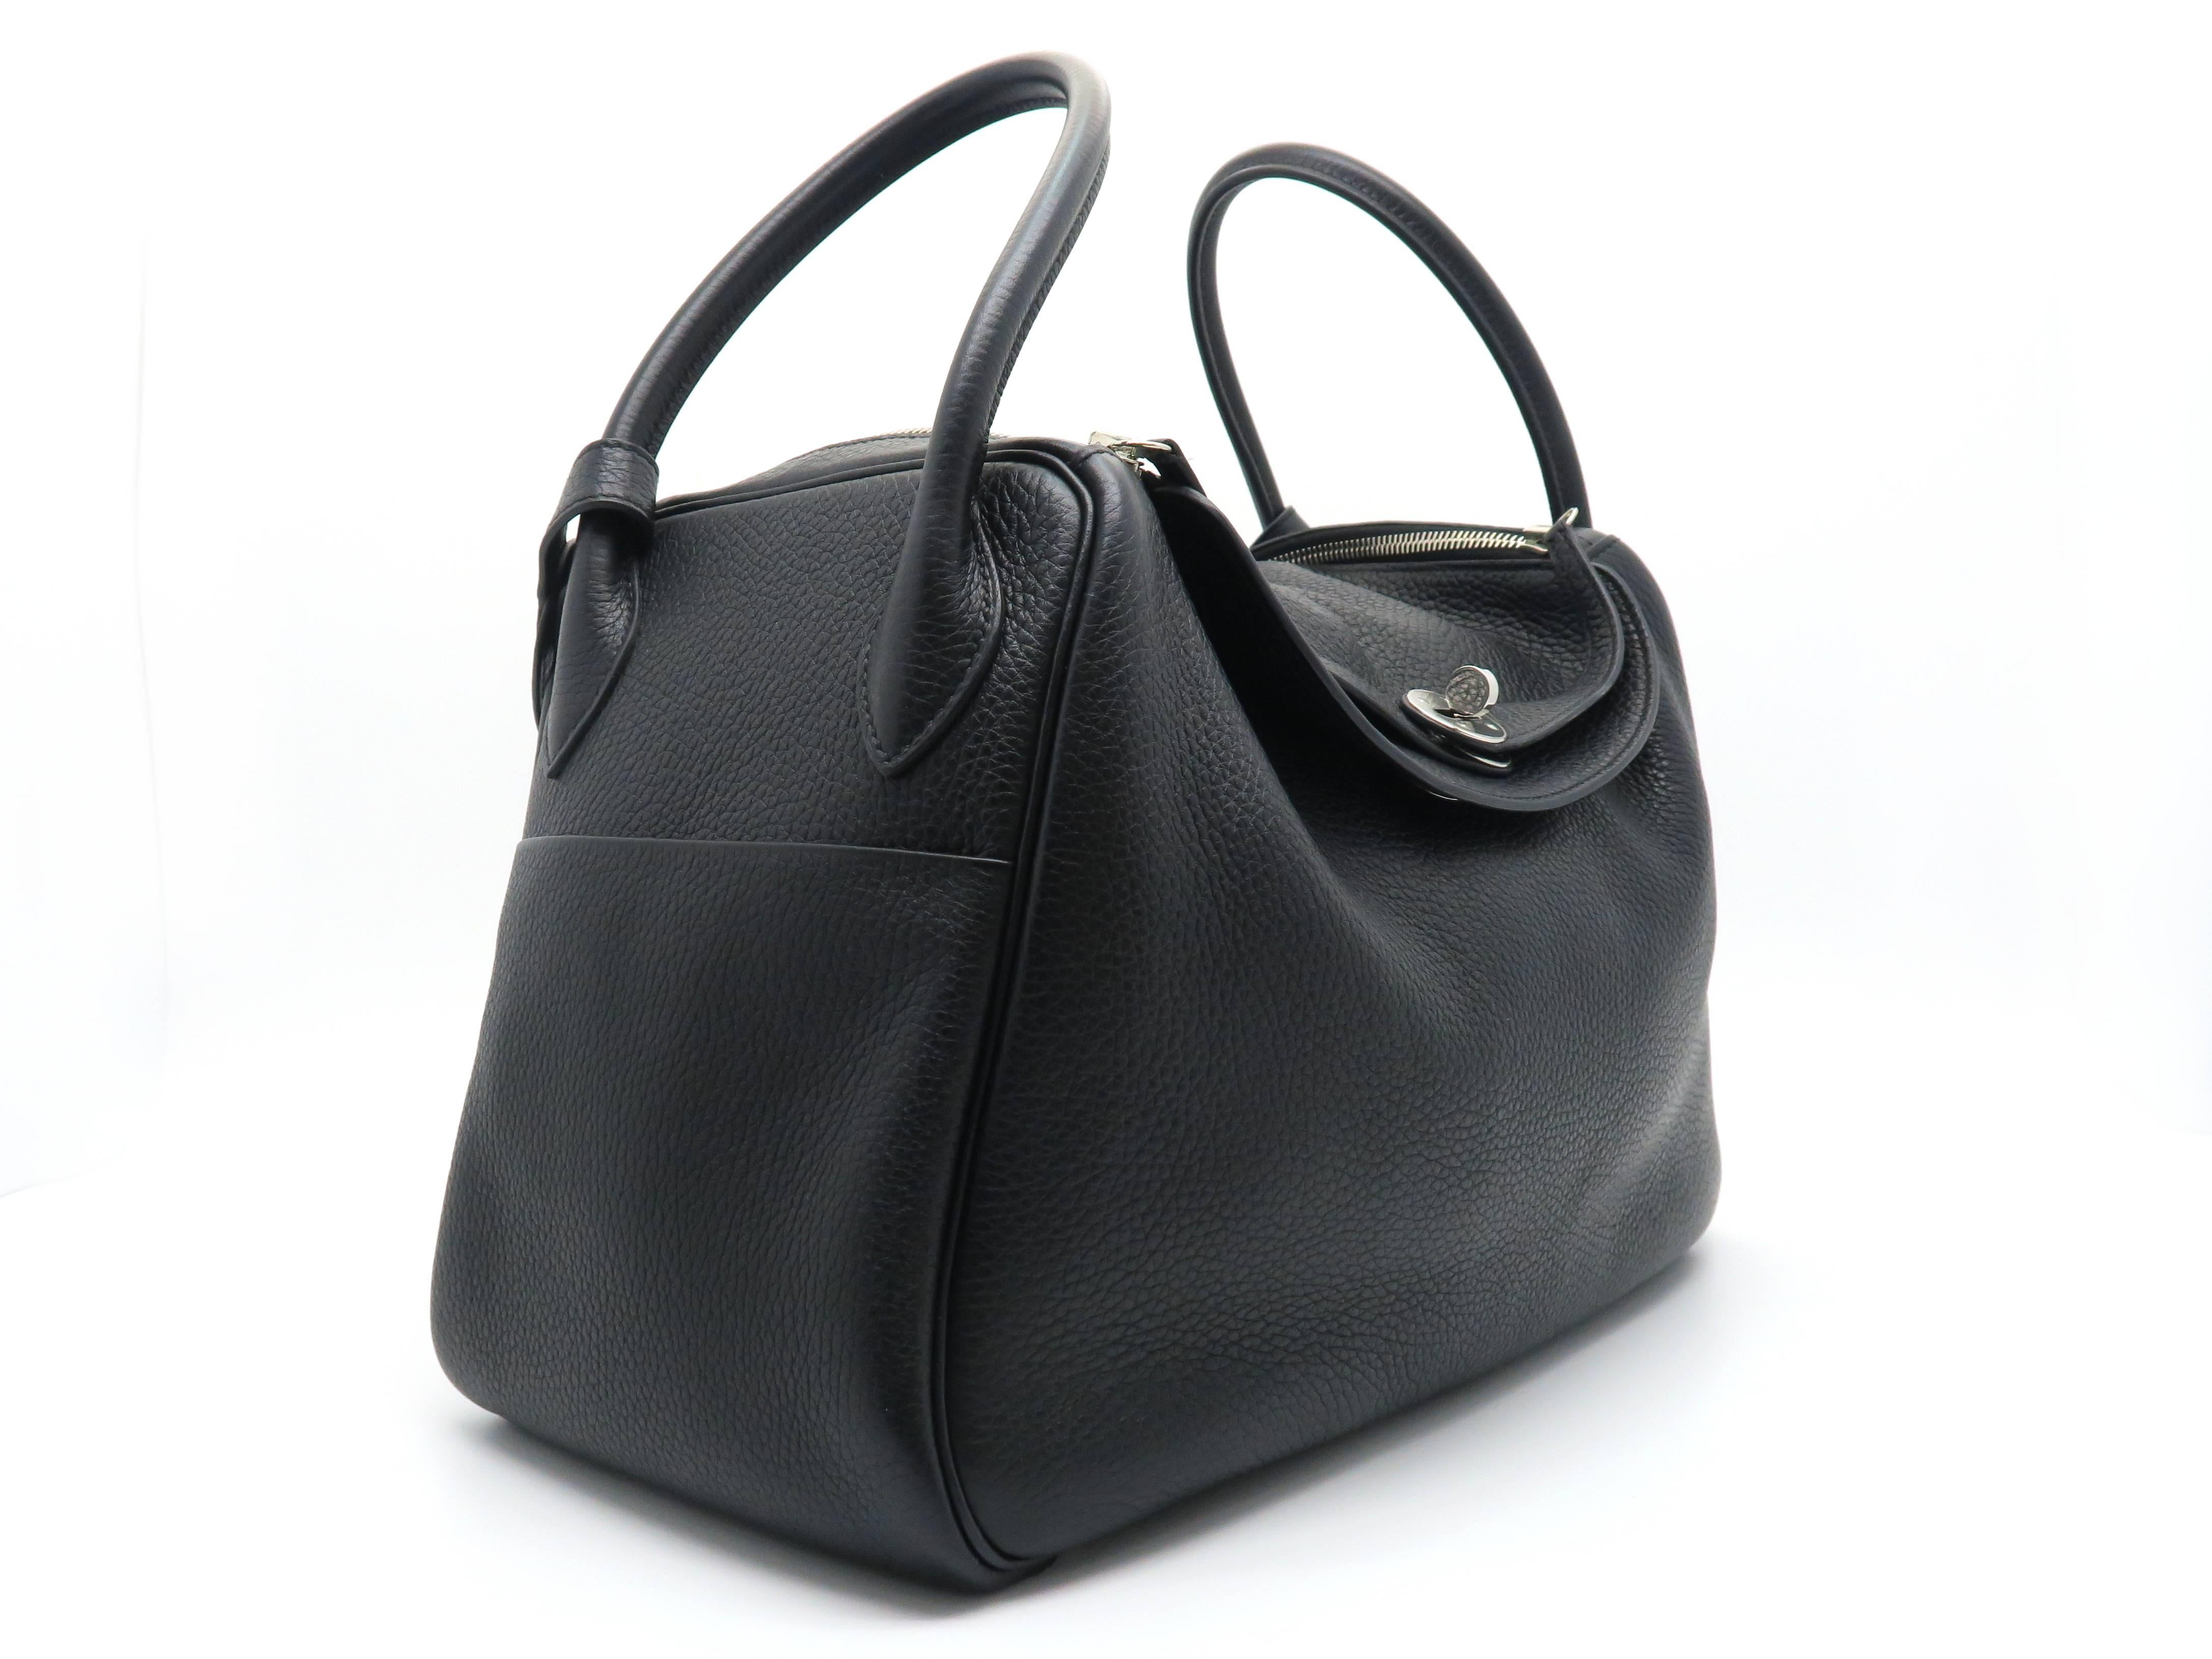 Color: Noir (designer color) / Black

Material: Taurillon Clemence Leather

Condition: Rank A
Overall: Good, few minor defects
Surface: Good
Corners: Good
Edges: Good
Handles/Strap: Good
Hardware: Minor Scratches
Others: Leather Slightly